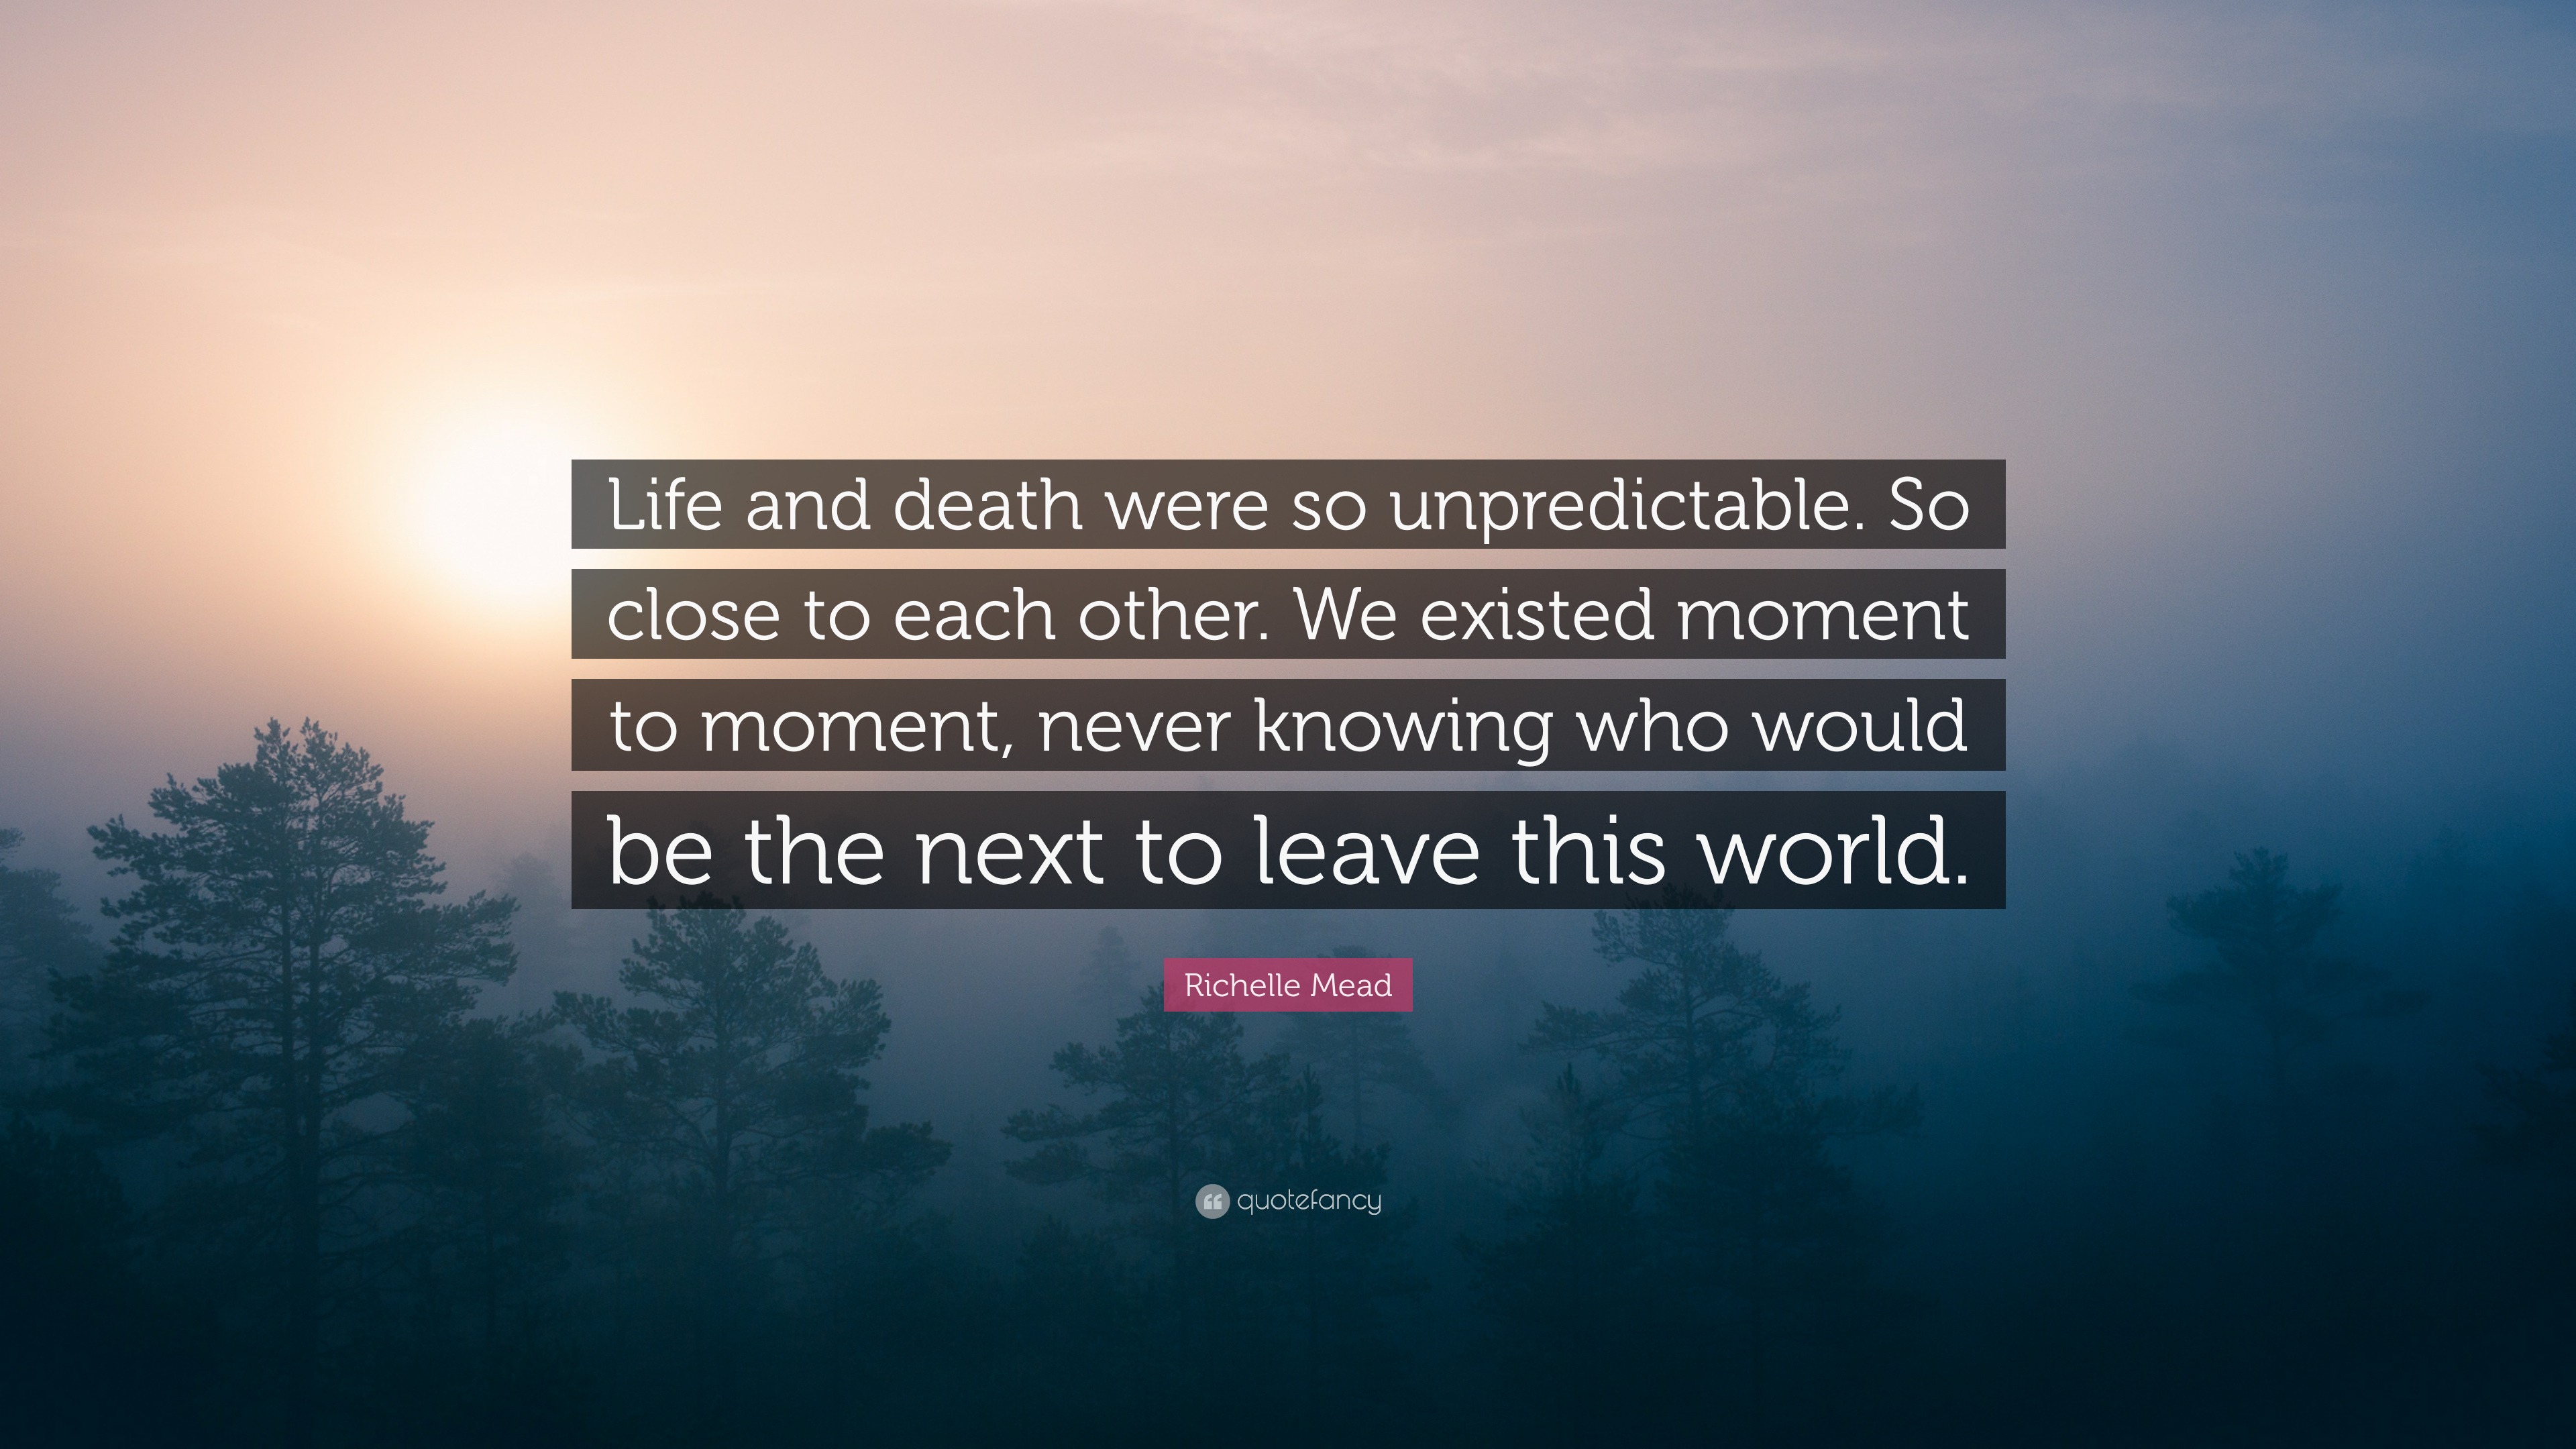 quote life and richelle mead quote u201clife and were so unpredictable so